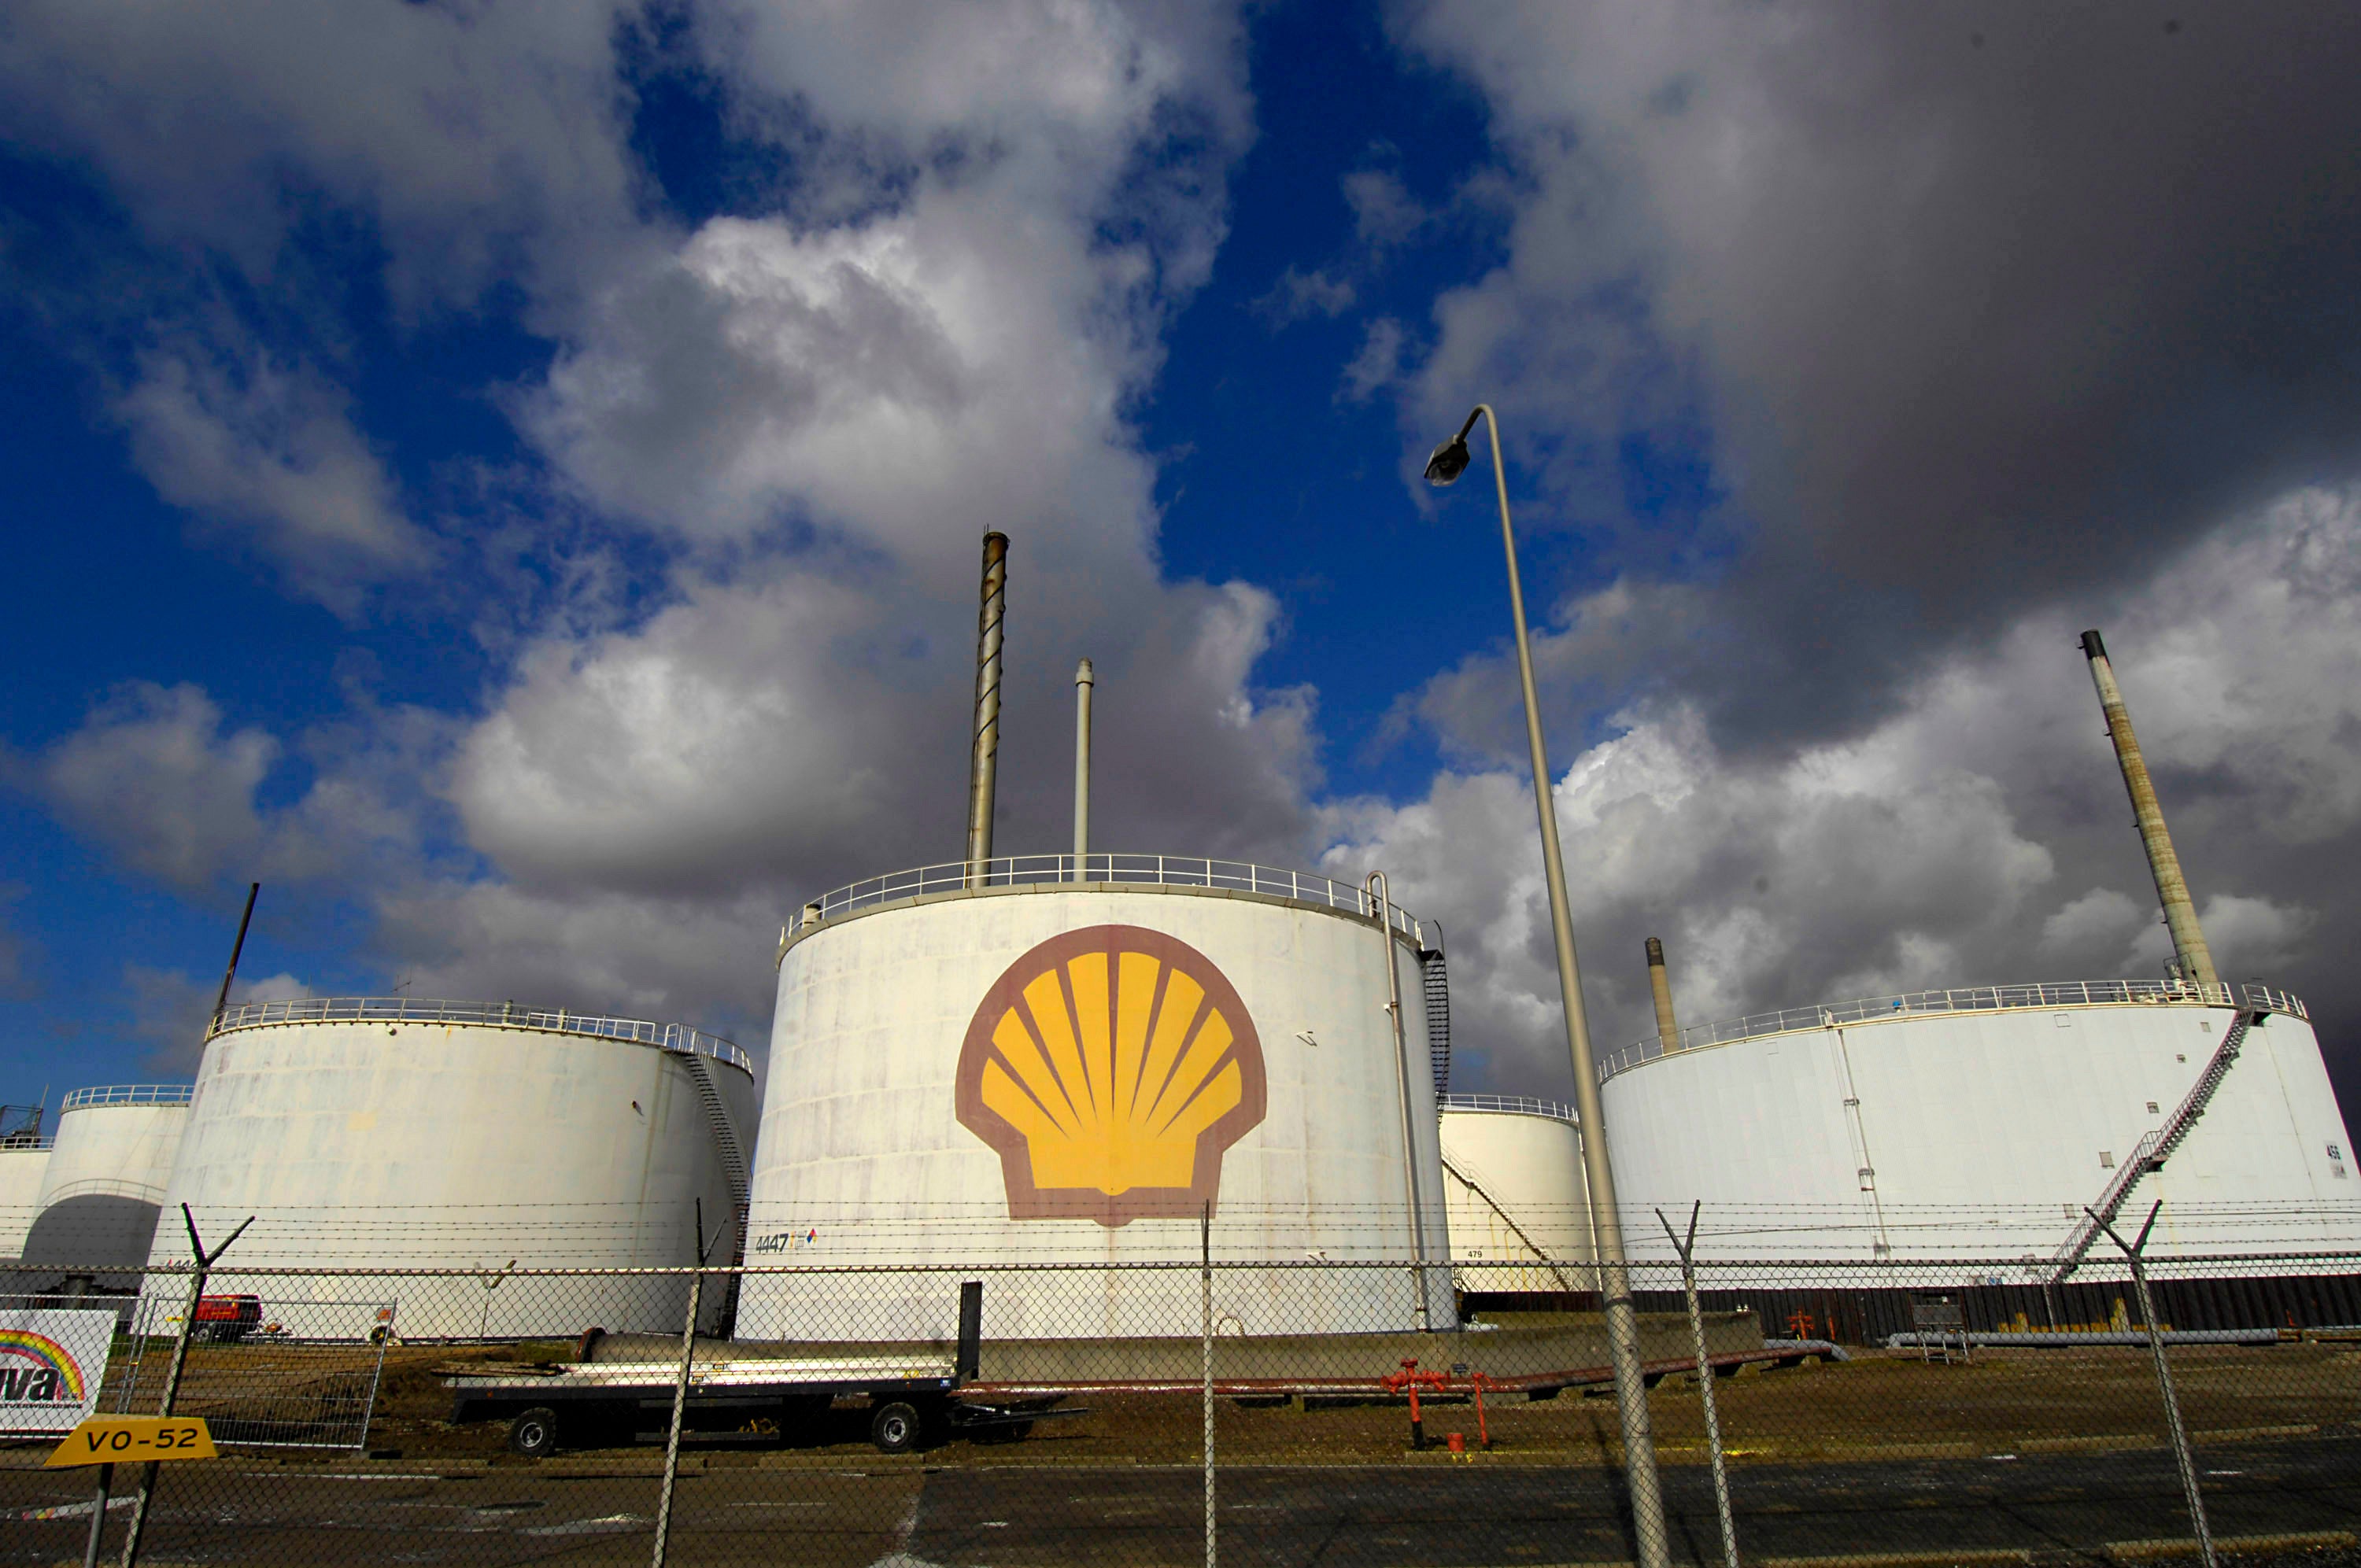 A court in the Hague ruled that Shell was not reducing its CO2 emissions fast enough